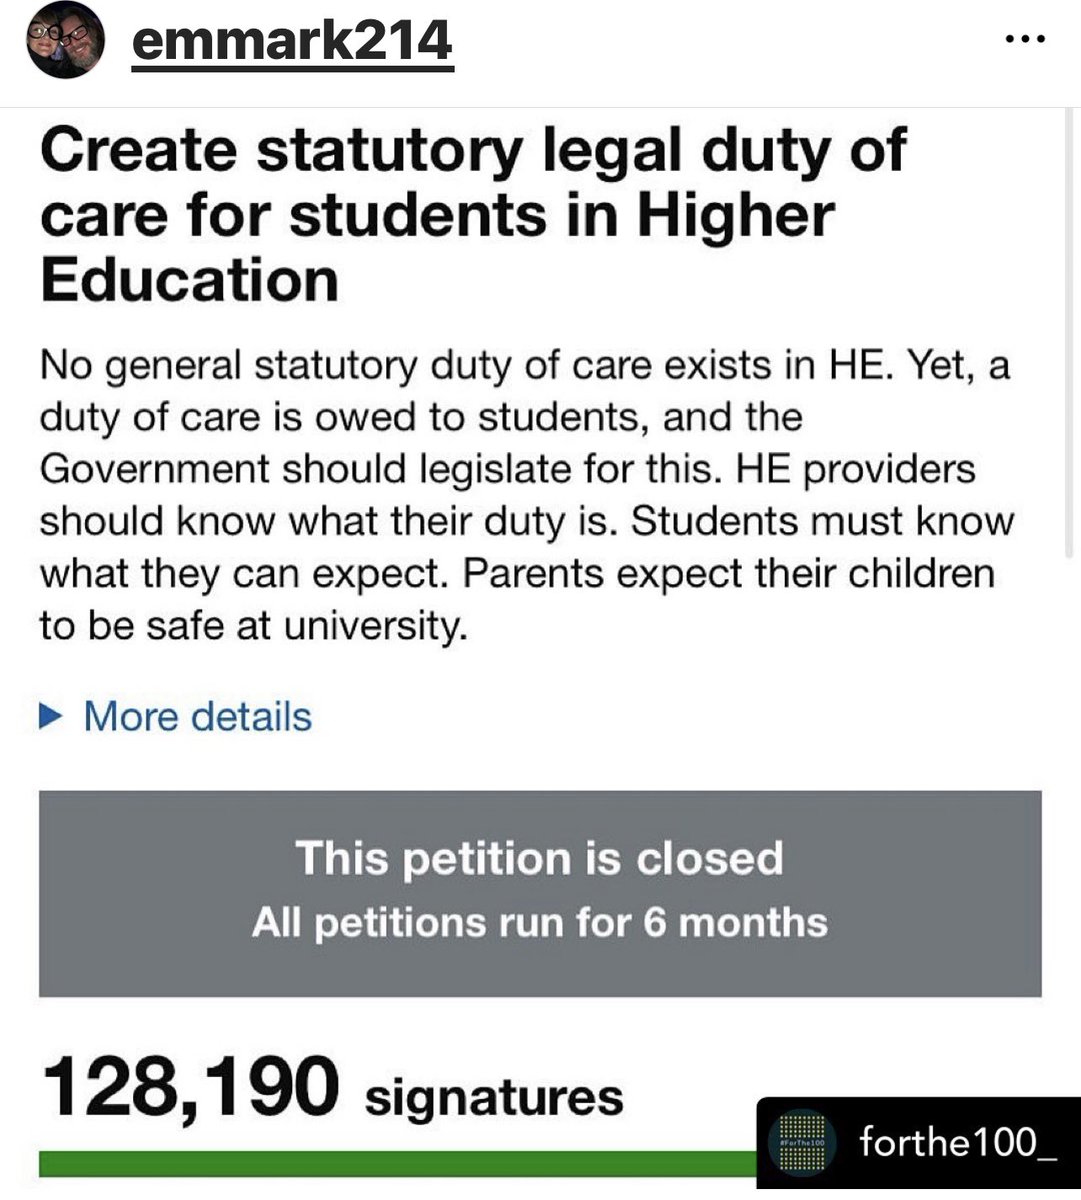 It’s official, as of midnight tonight the petition has closed, with a grand total of 128,190 signatures! YOU did it 
Thank you all, keep following for progress updates. Let’s keep this very important conversation going.

#forthe100#studentmentalhealth#suicideawareness